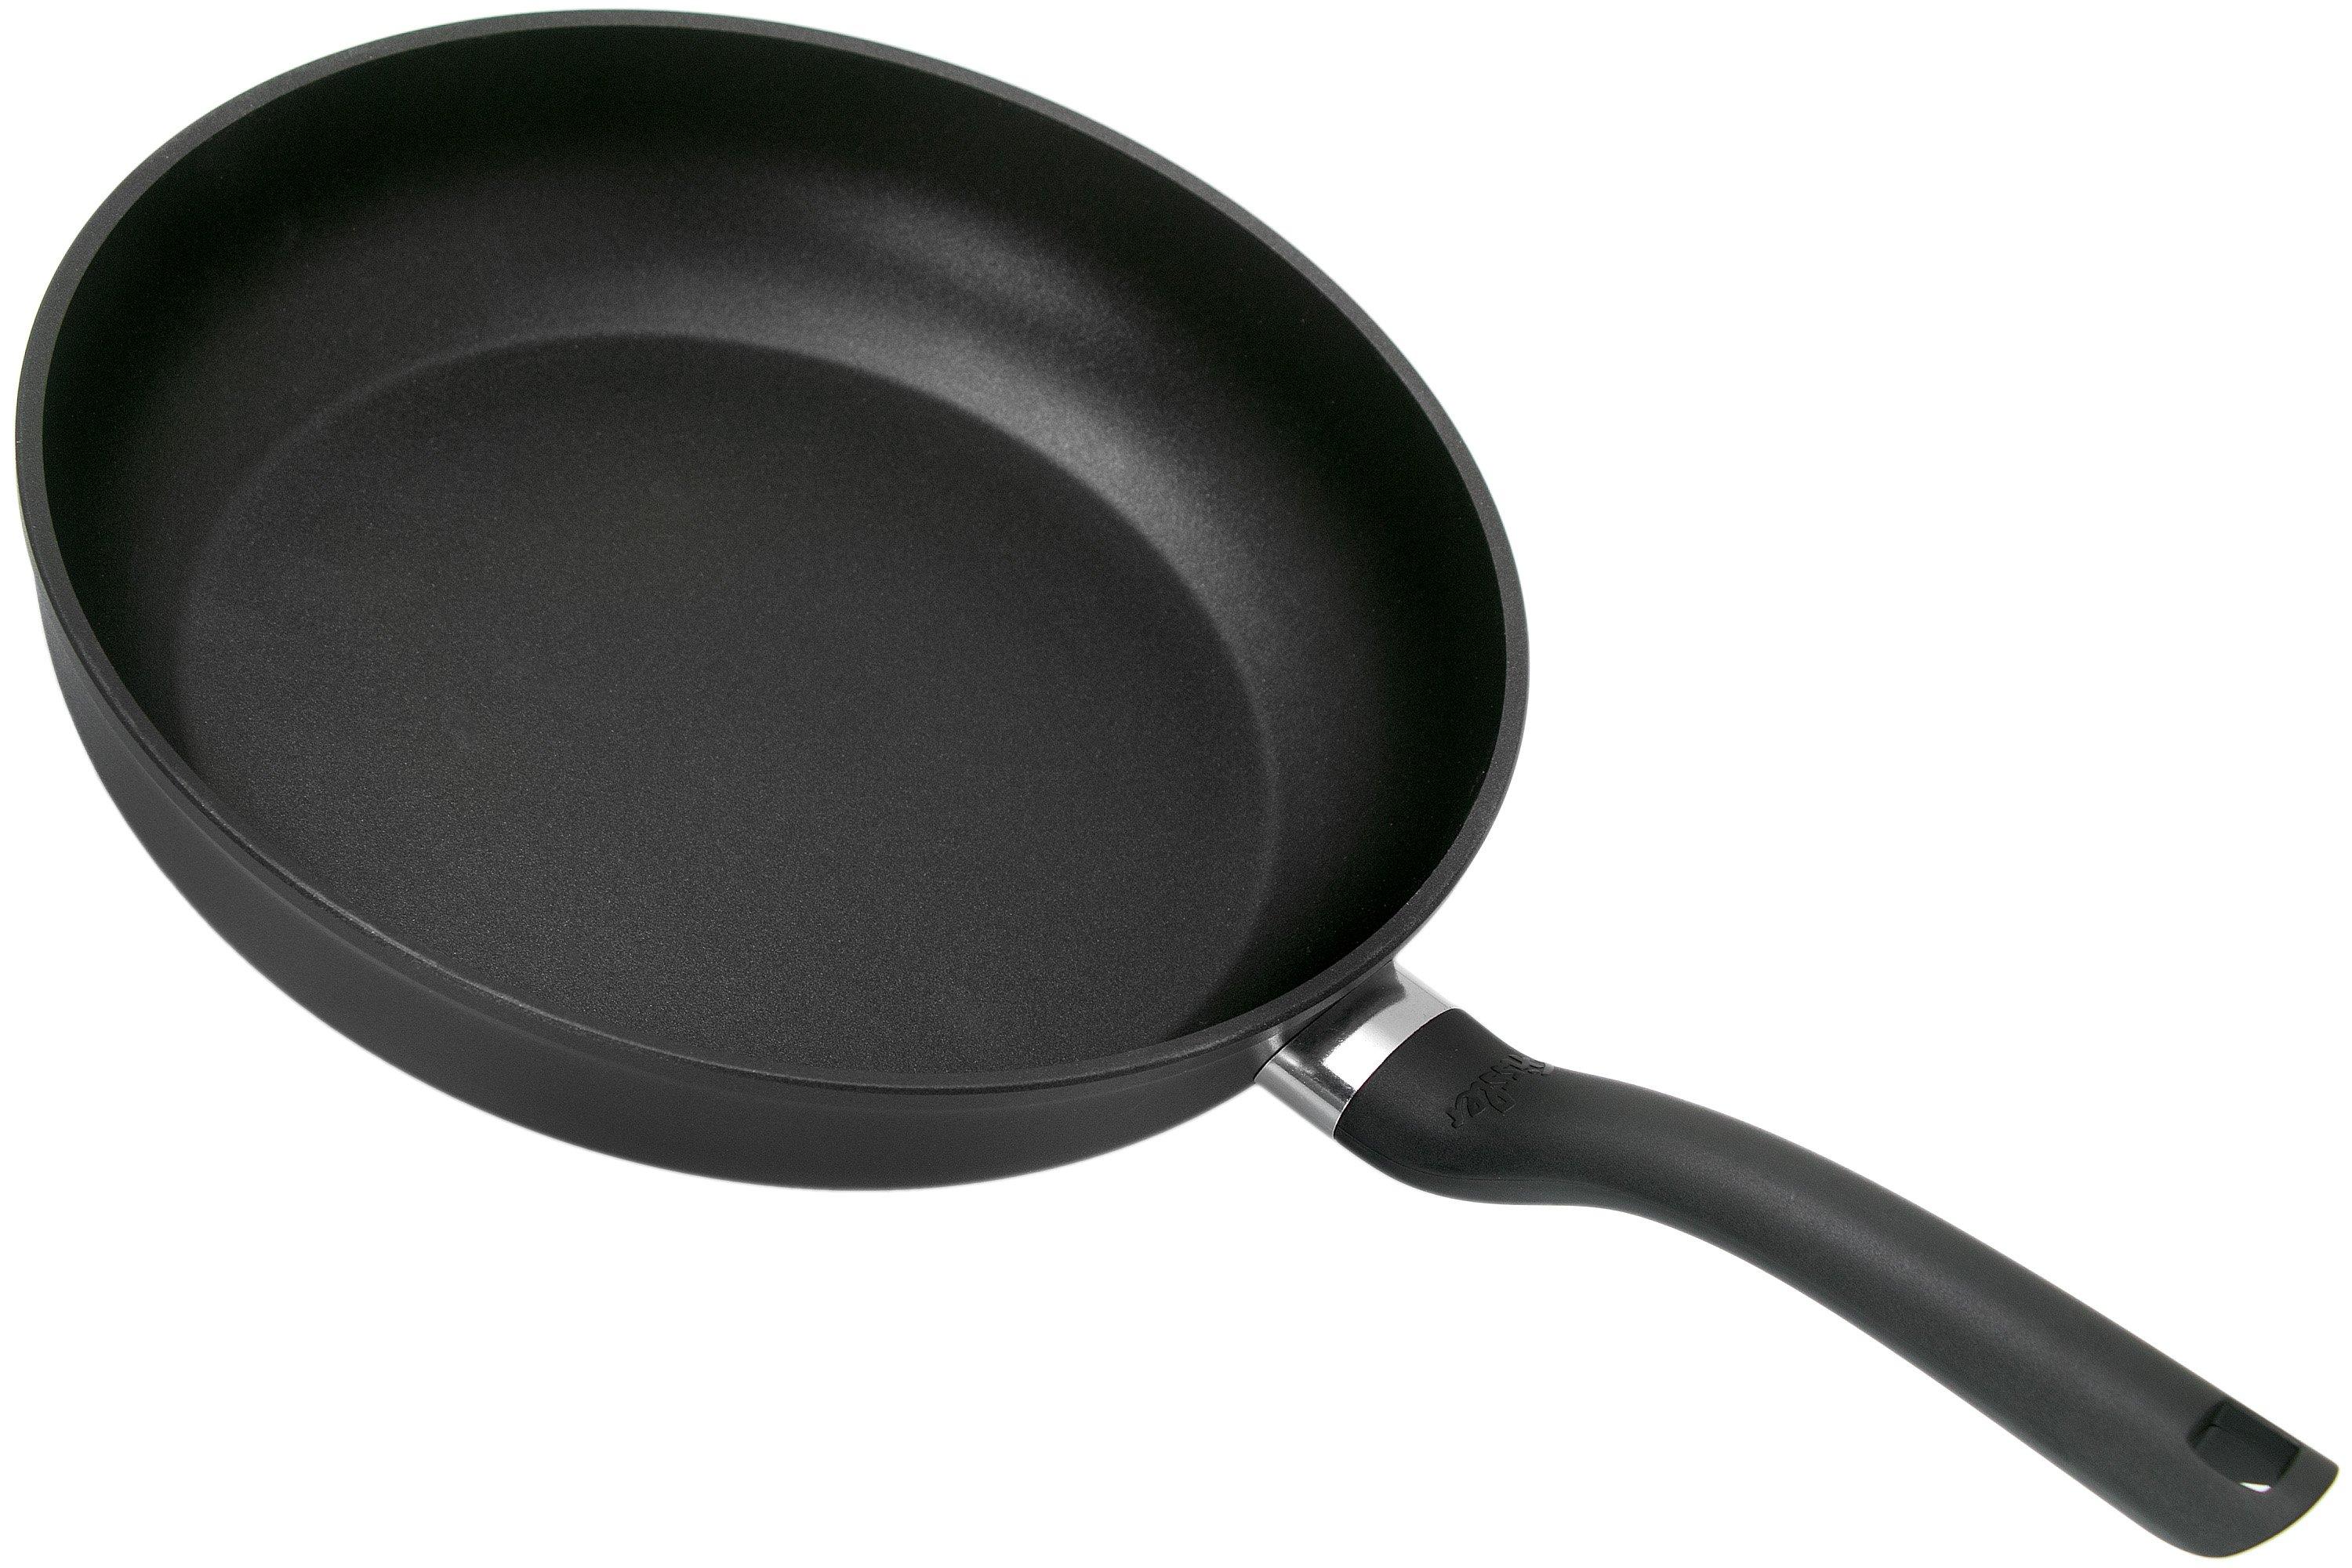 Fissler Cenit Induction 045-301-28-100, | cm shopping 28 pan frying Advantageously at